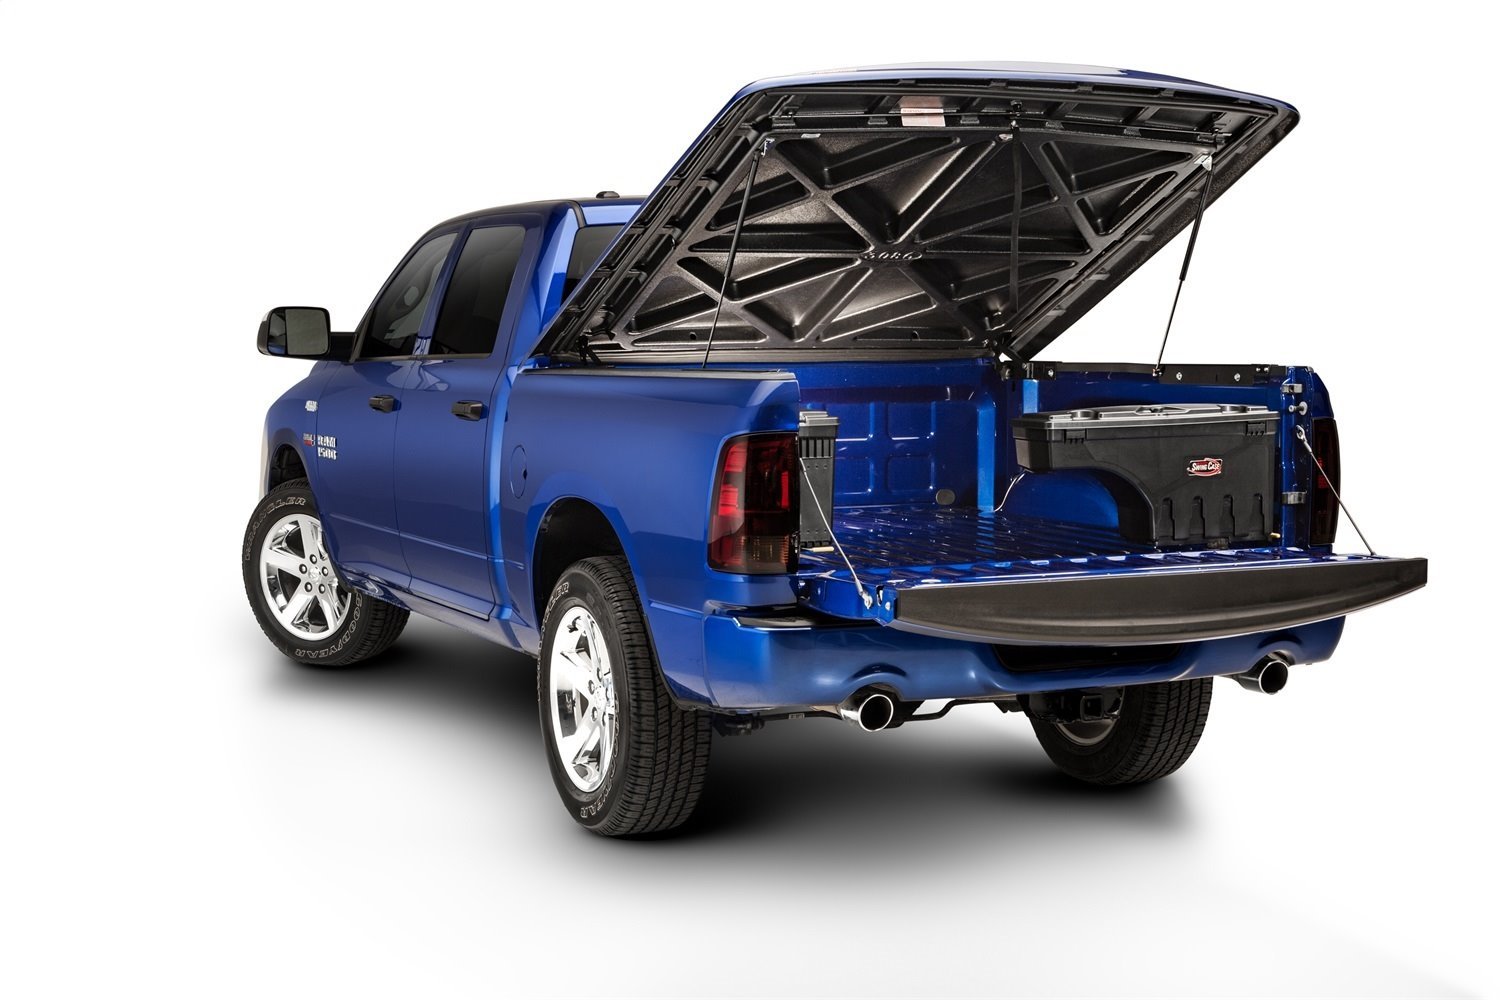 SC200P Swing Case, 1999-2016 Ford F-250/350 Passenger Side, 2016 Models w/ Factory Tow Package, Black